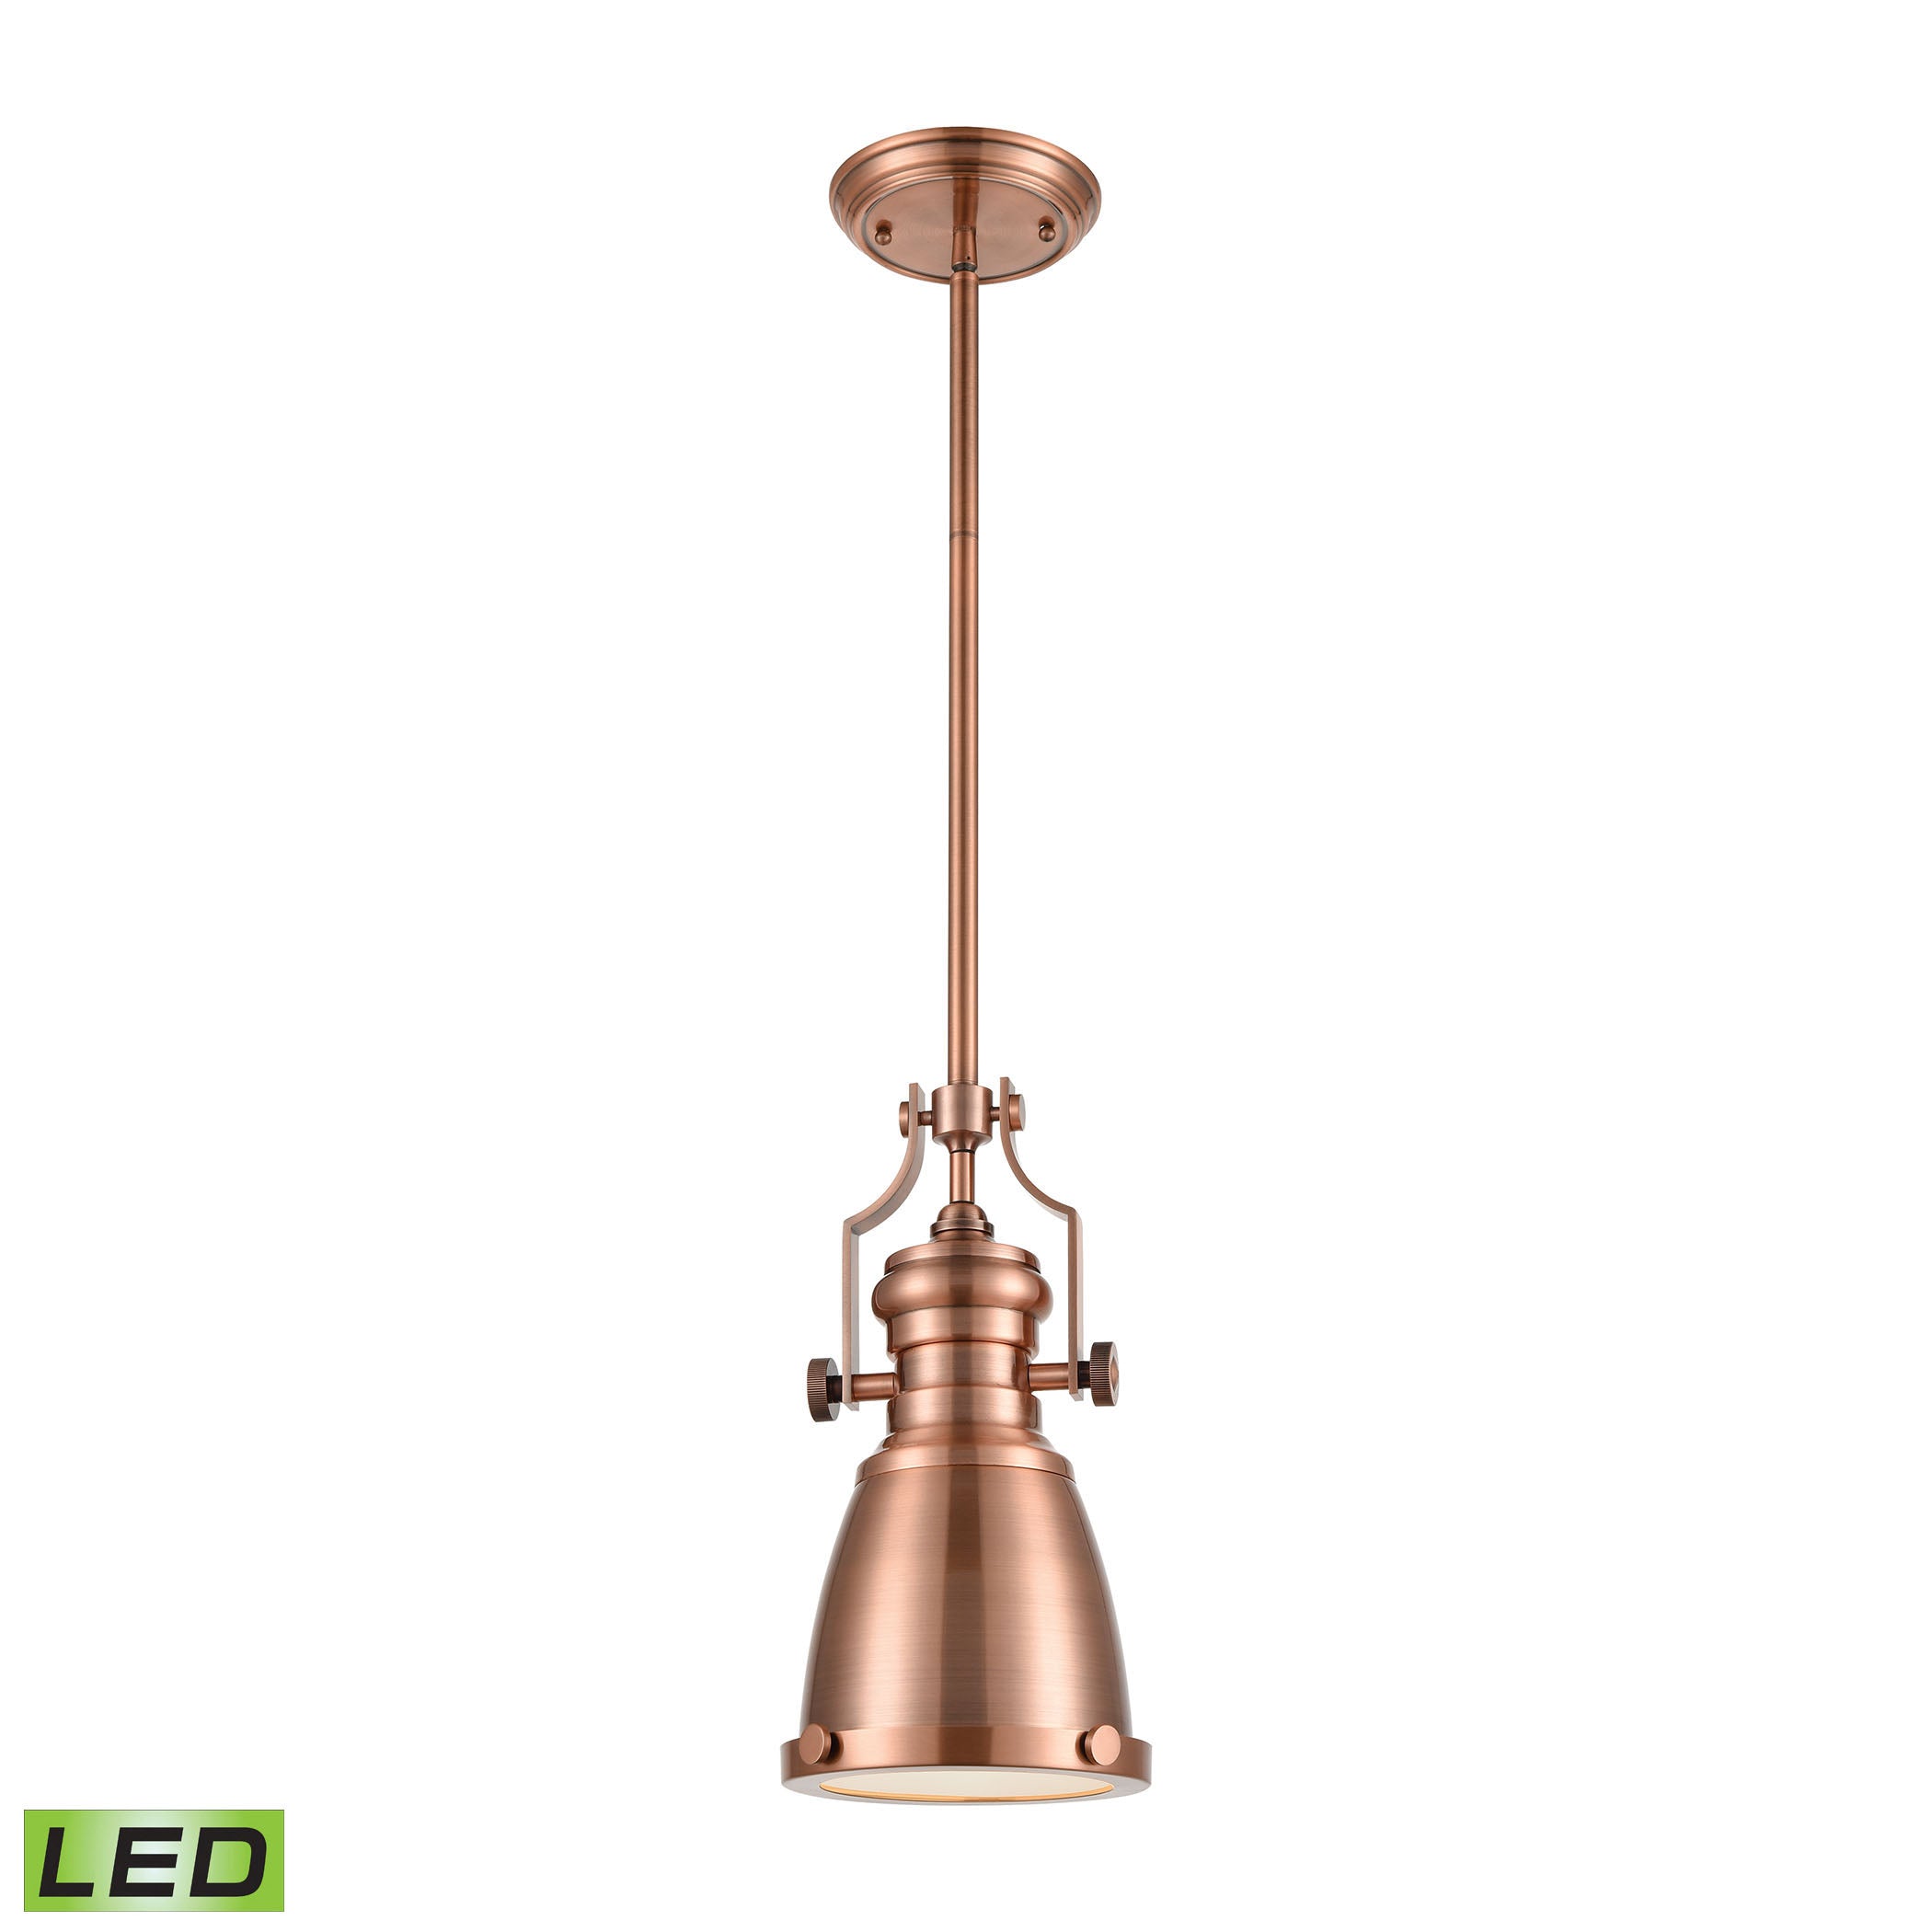 ELK Lighting 66149-1-LED Chadwick 1-Light Mini Pendant in Antique Copper with Matching Shade - Includes LED Bulb